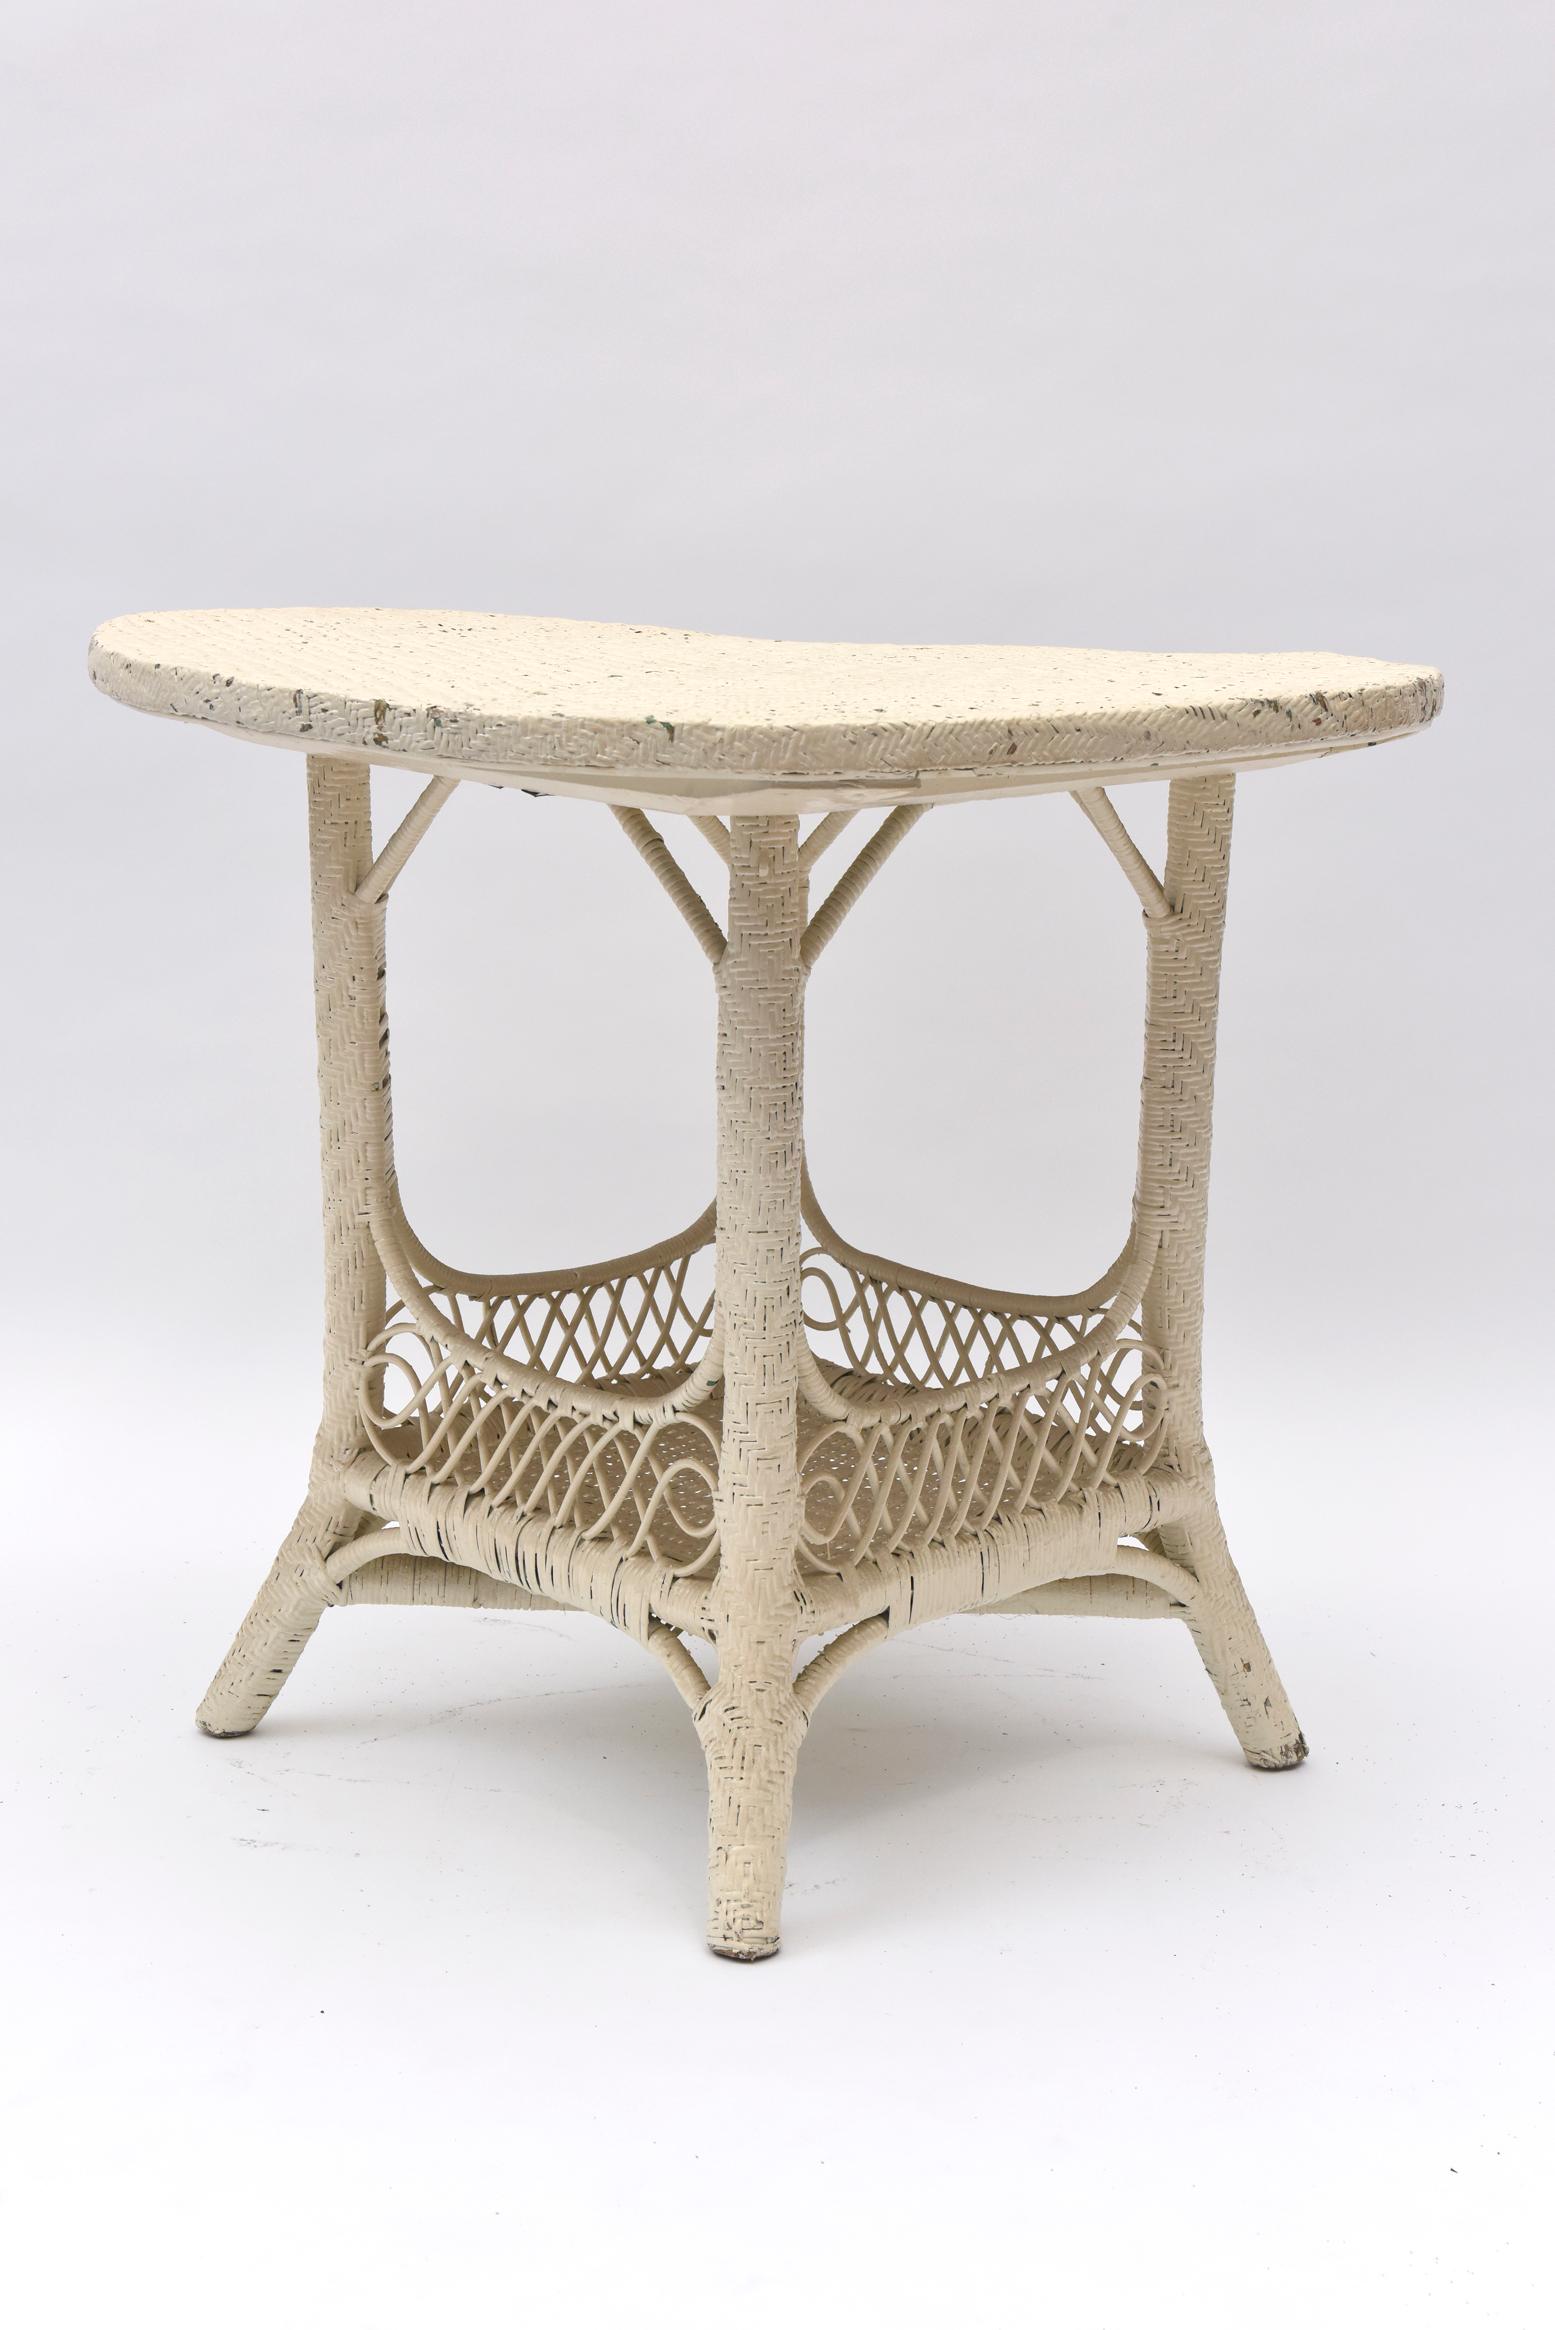 19th Century Victorian Round Wicker Table with Woven Openwork Enclosed Bottom shelf